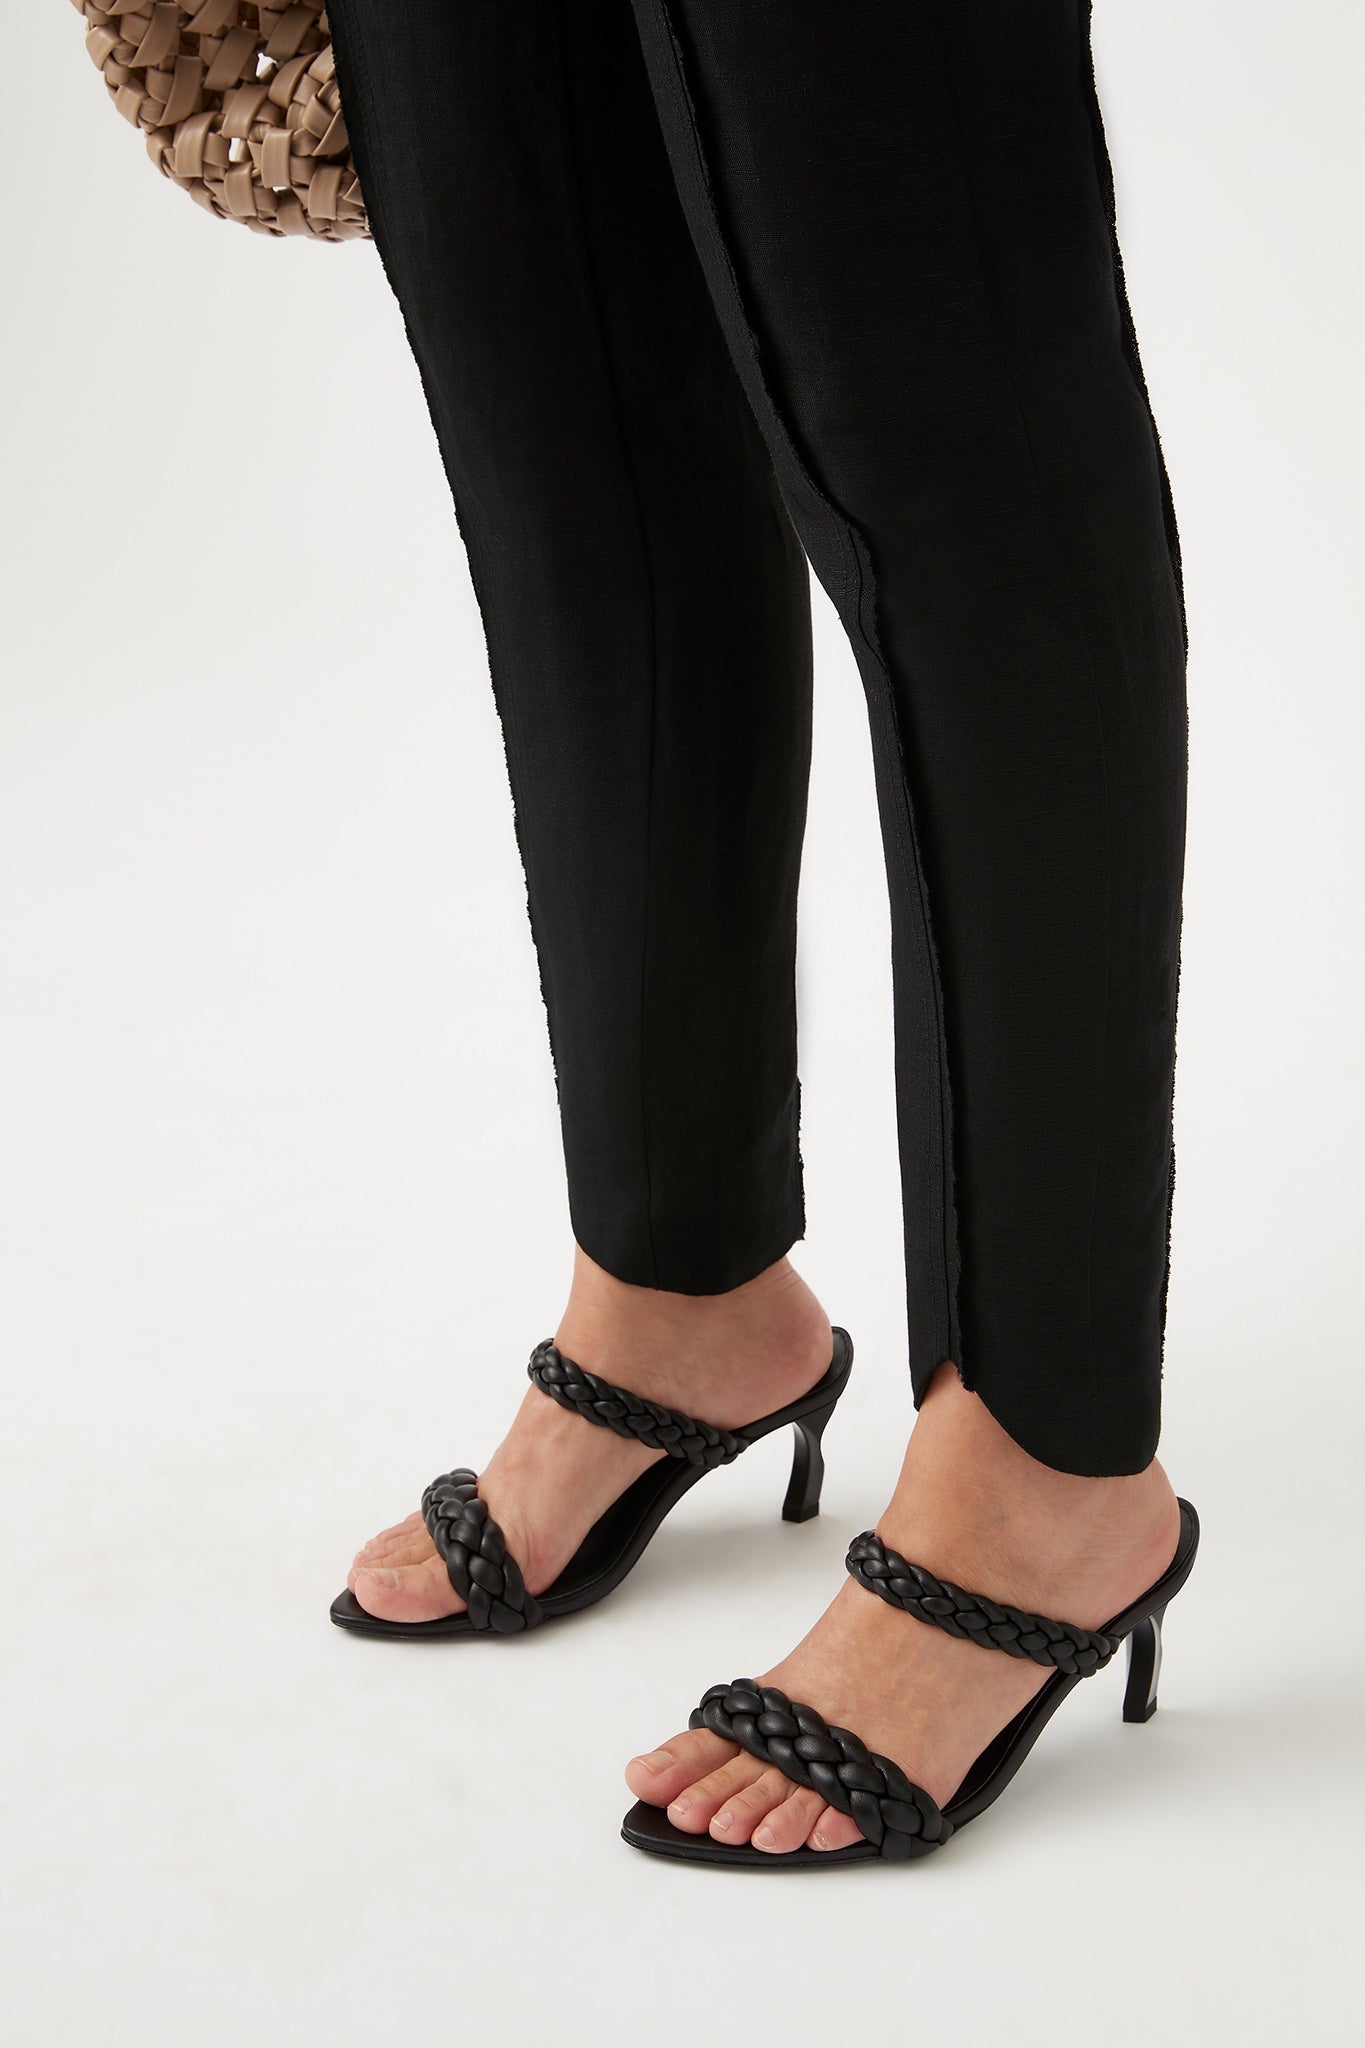 Wgsten Lifestyle Ankle Length Western Wear Legging Price in India - Buy  Wgsten Lifestyle Ankle Length Western Wear Legging online at Flipkart.com